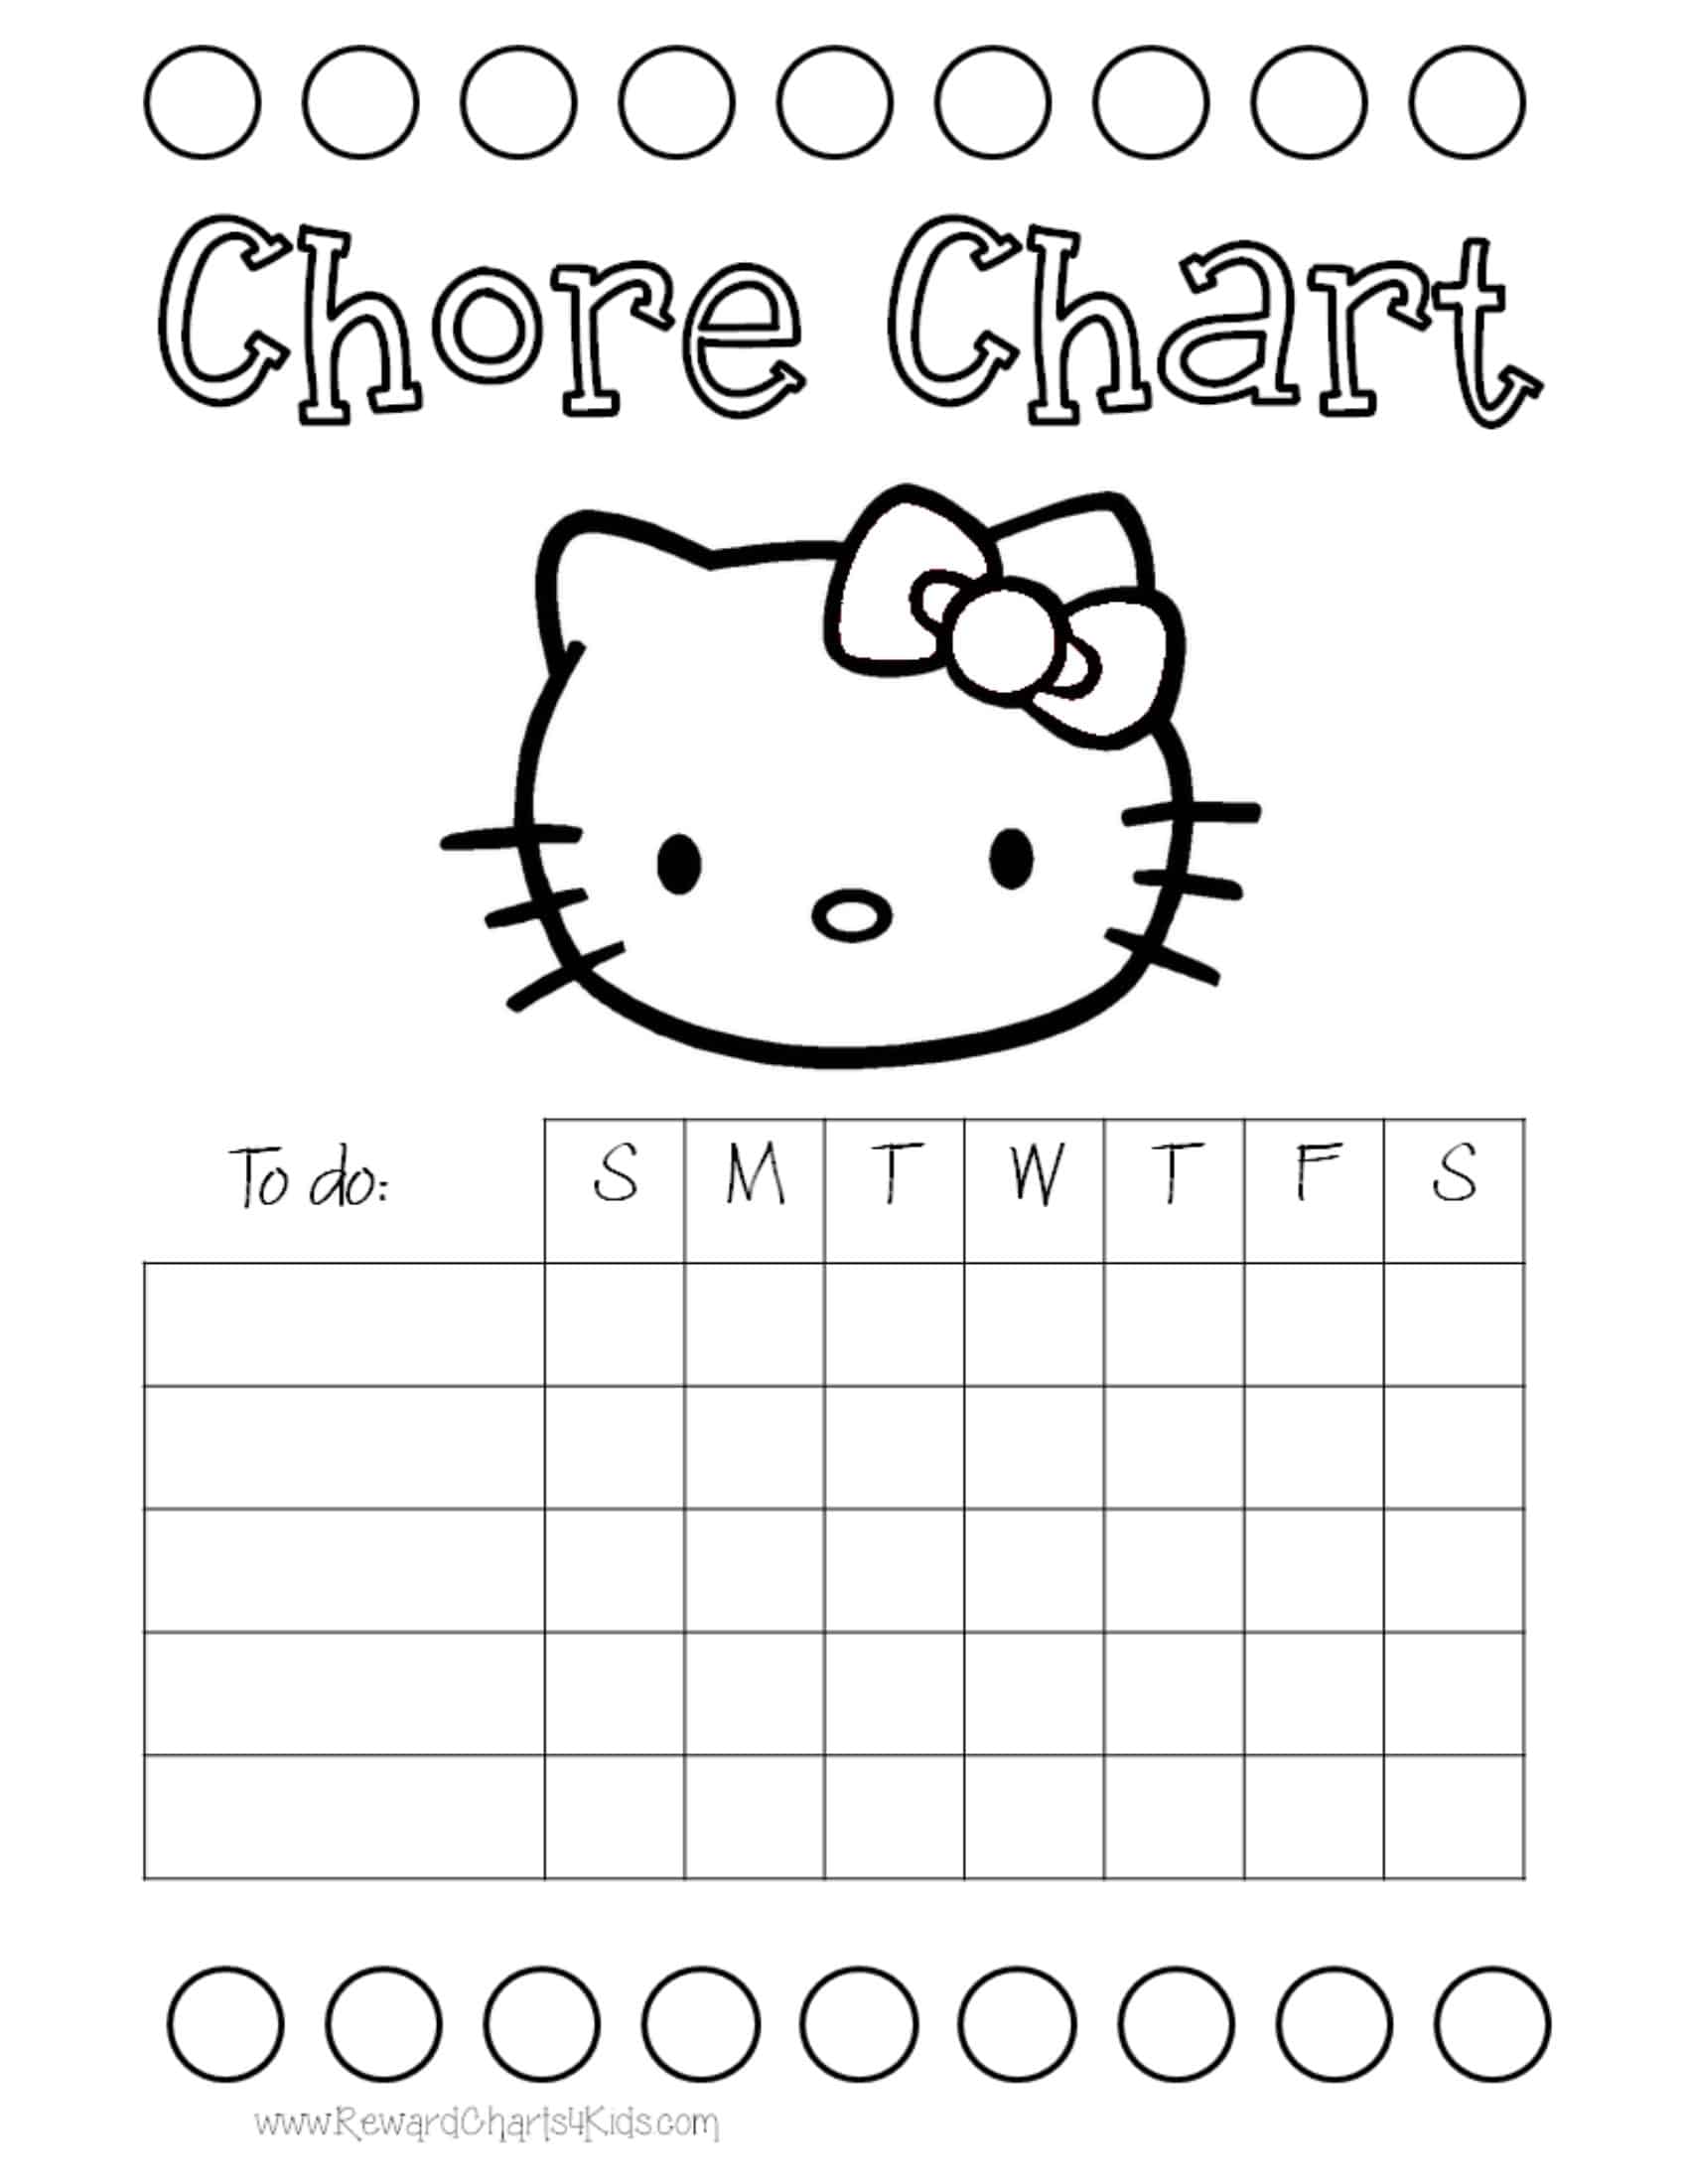 Download Chore Charts for Kids